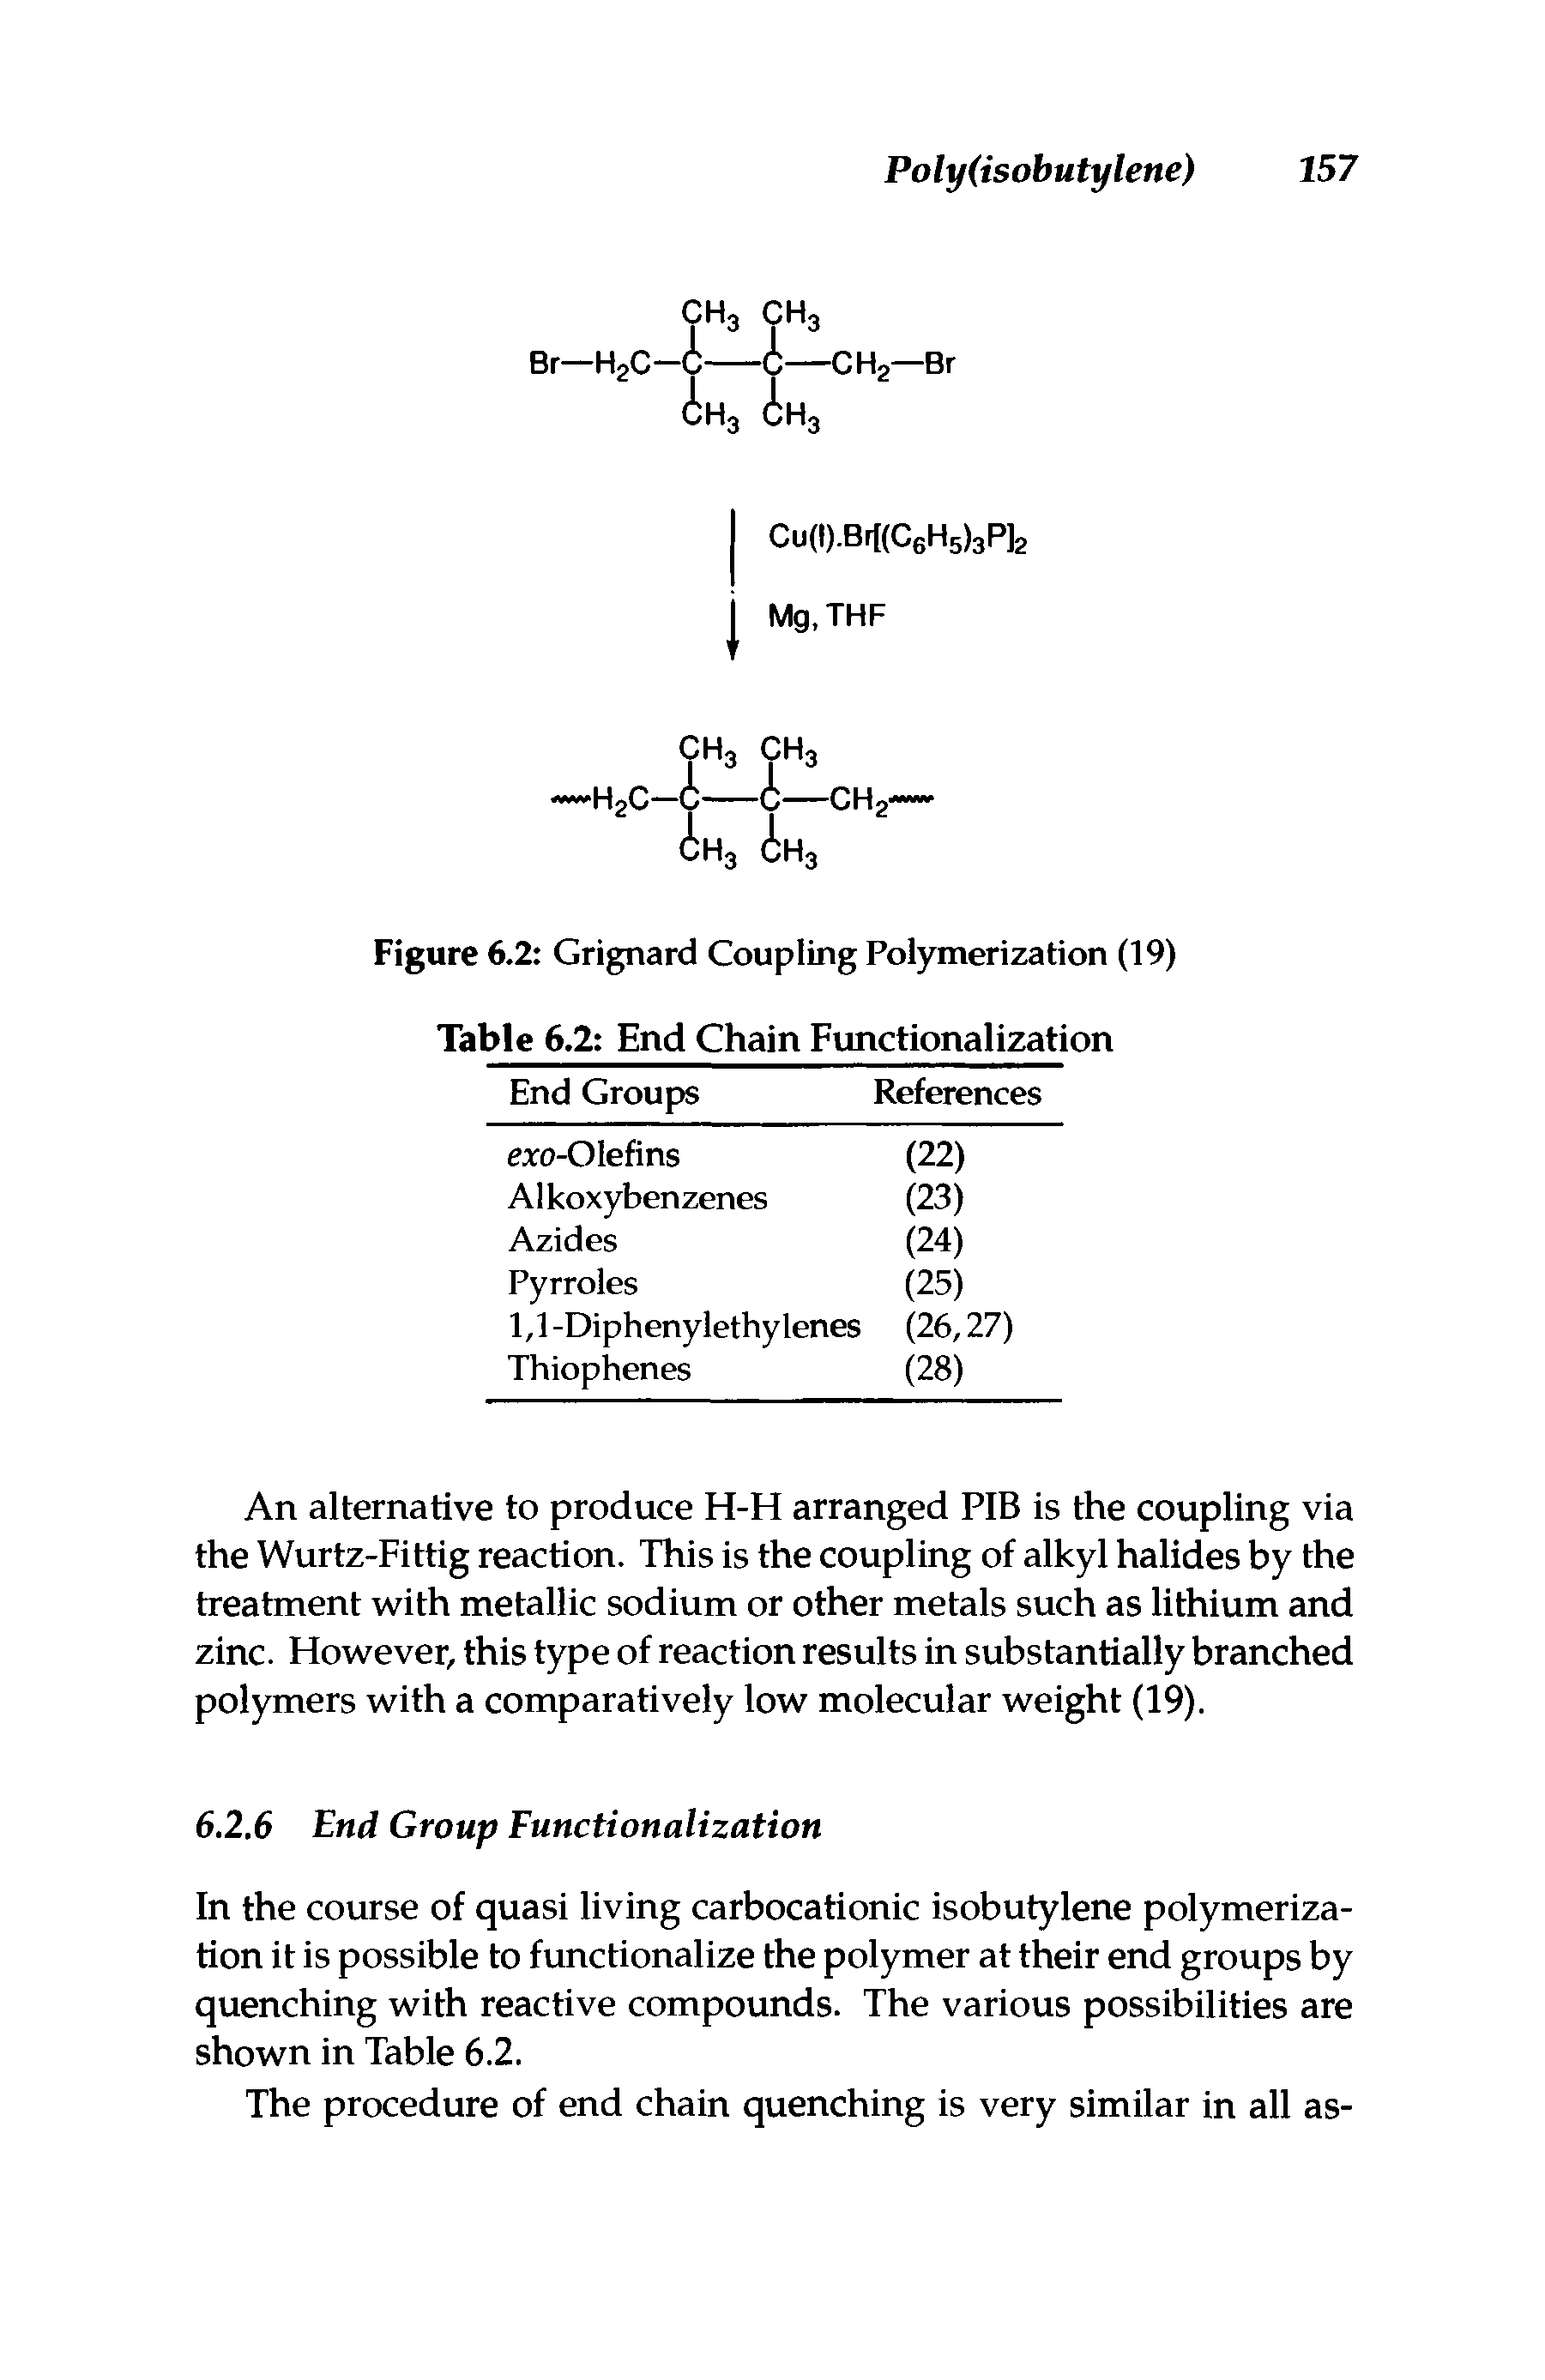 Figure 6.2 Grignard Coupling Polymerization (19) Table 6.2 End Chain Functionalization...